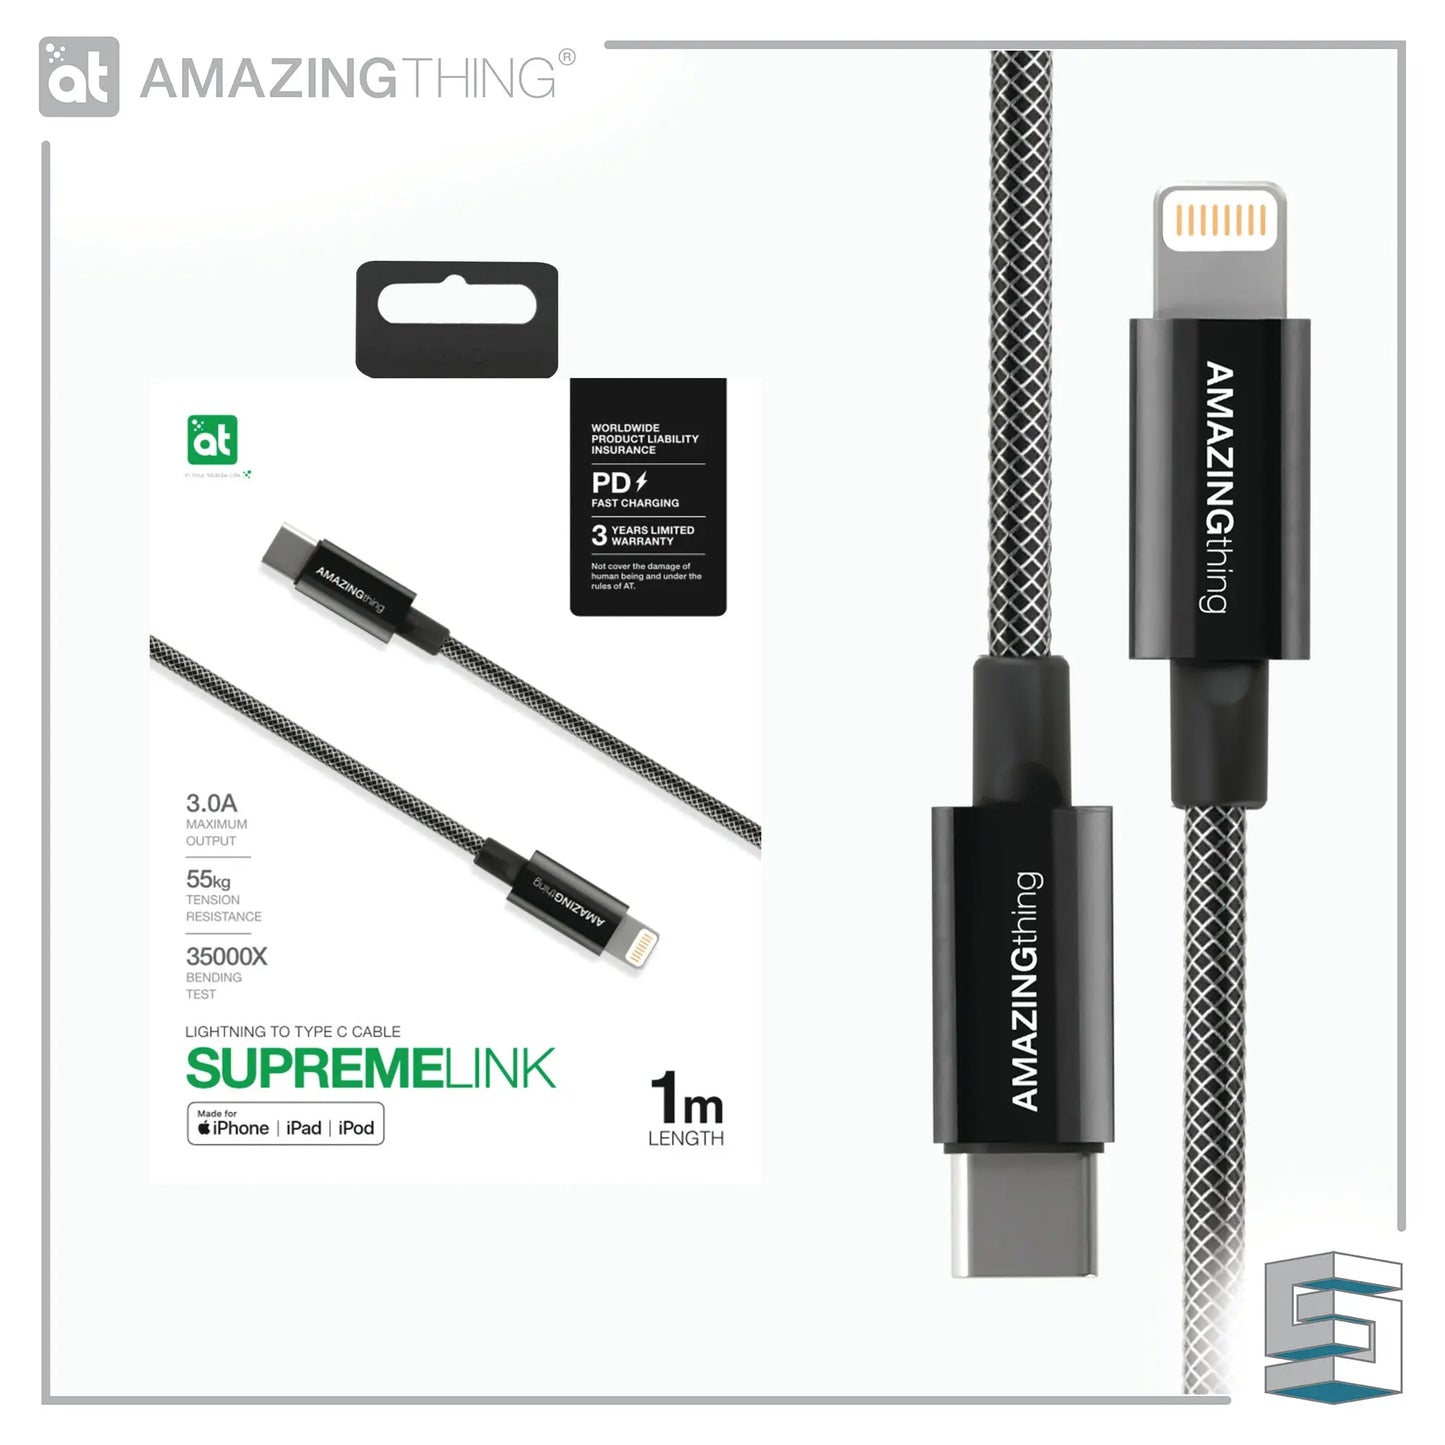 Charge & Sync USB-C to Lightning Cable - AMAZINGTHING SupremeLink Power Max (MFI) 1M Global Synergy Concepts